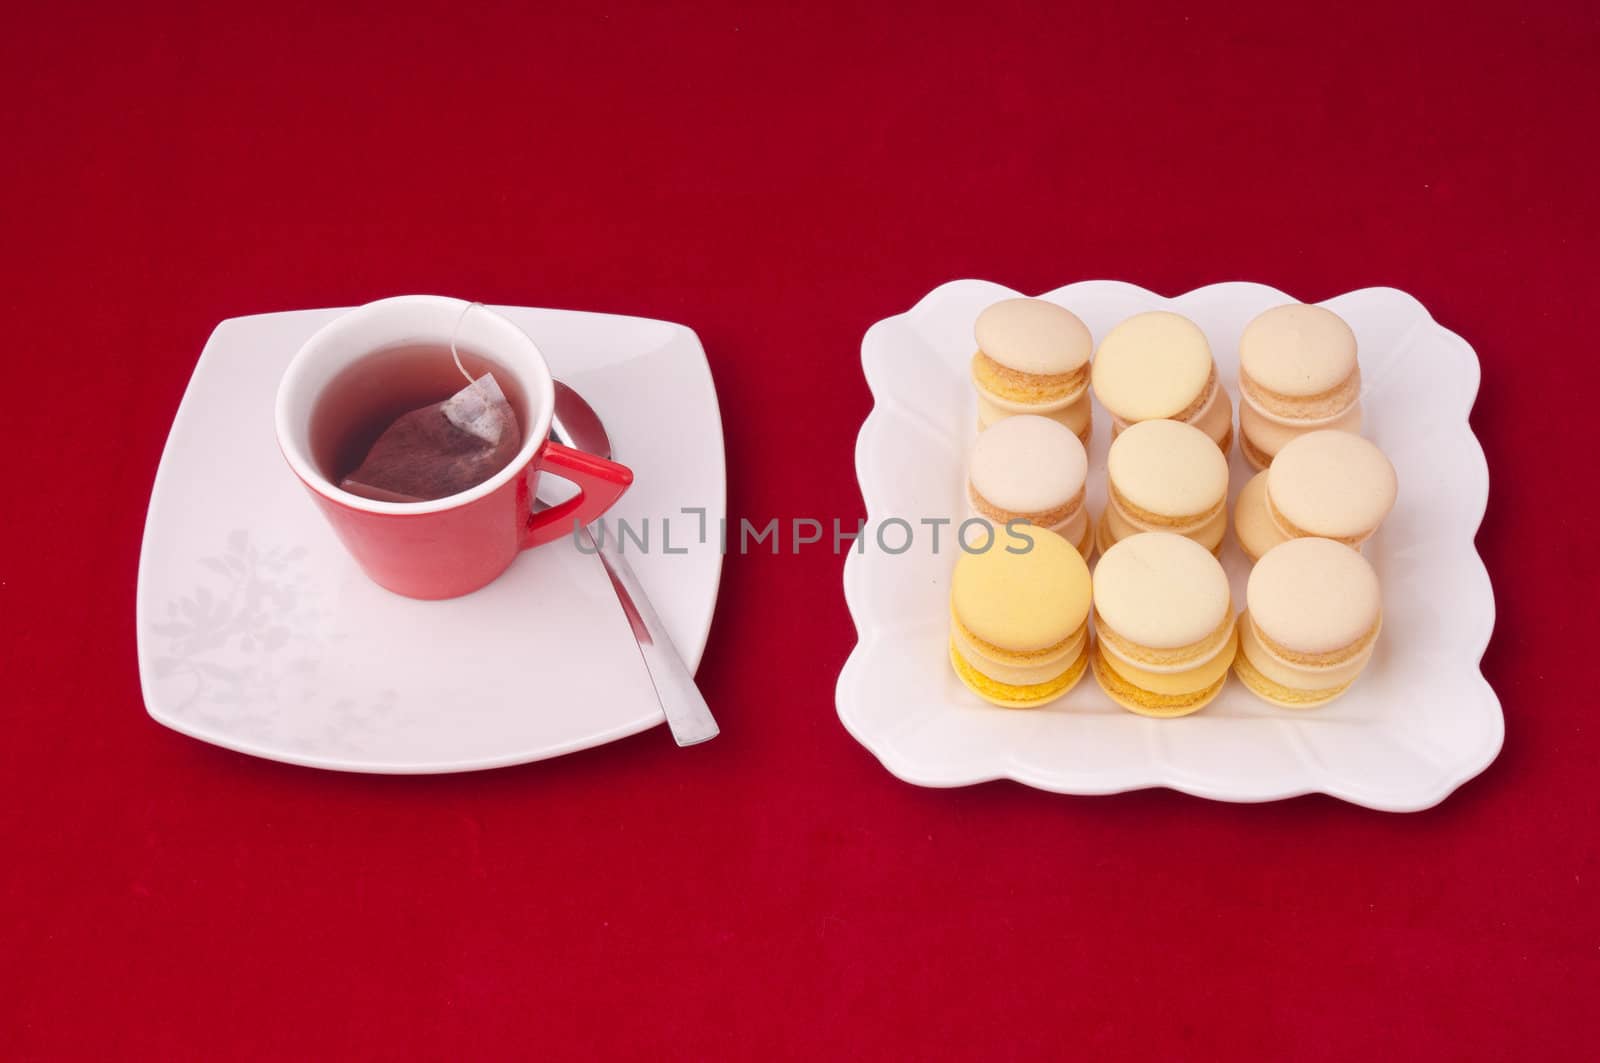 Cup of tea and stacked and aligned macaroons on a velvet tableclothe